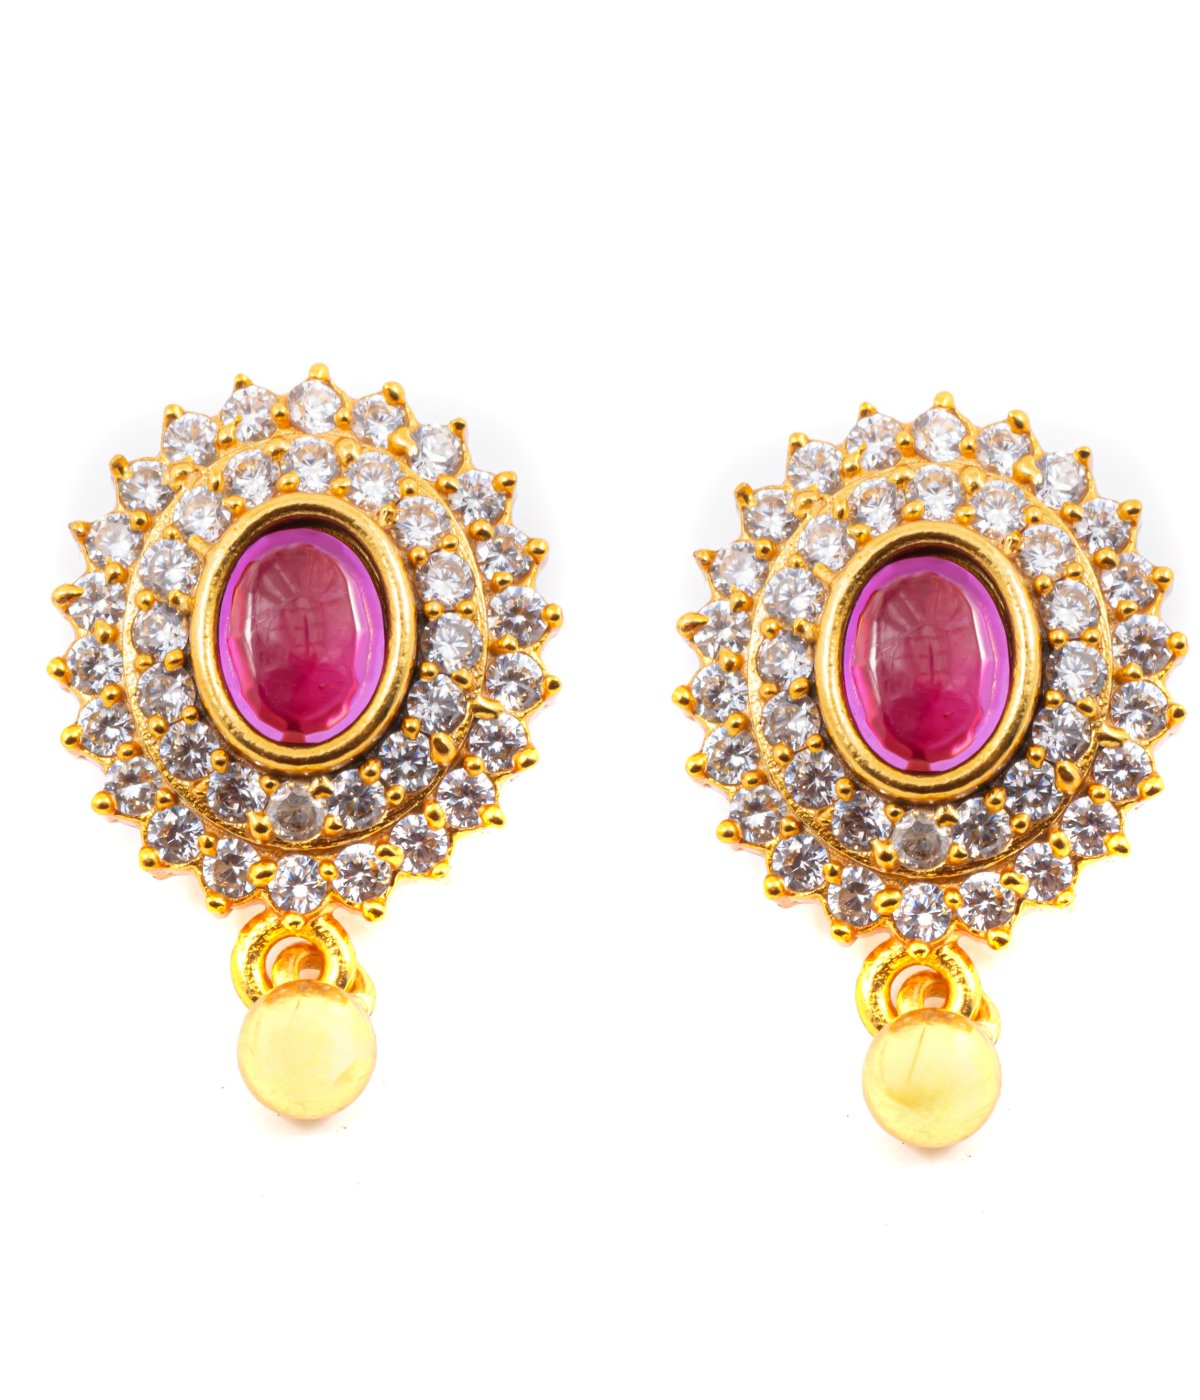 92.5 SILVER GOLD POLISHED FLOWER DESIGN RED STONE EARRINGS